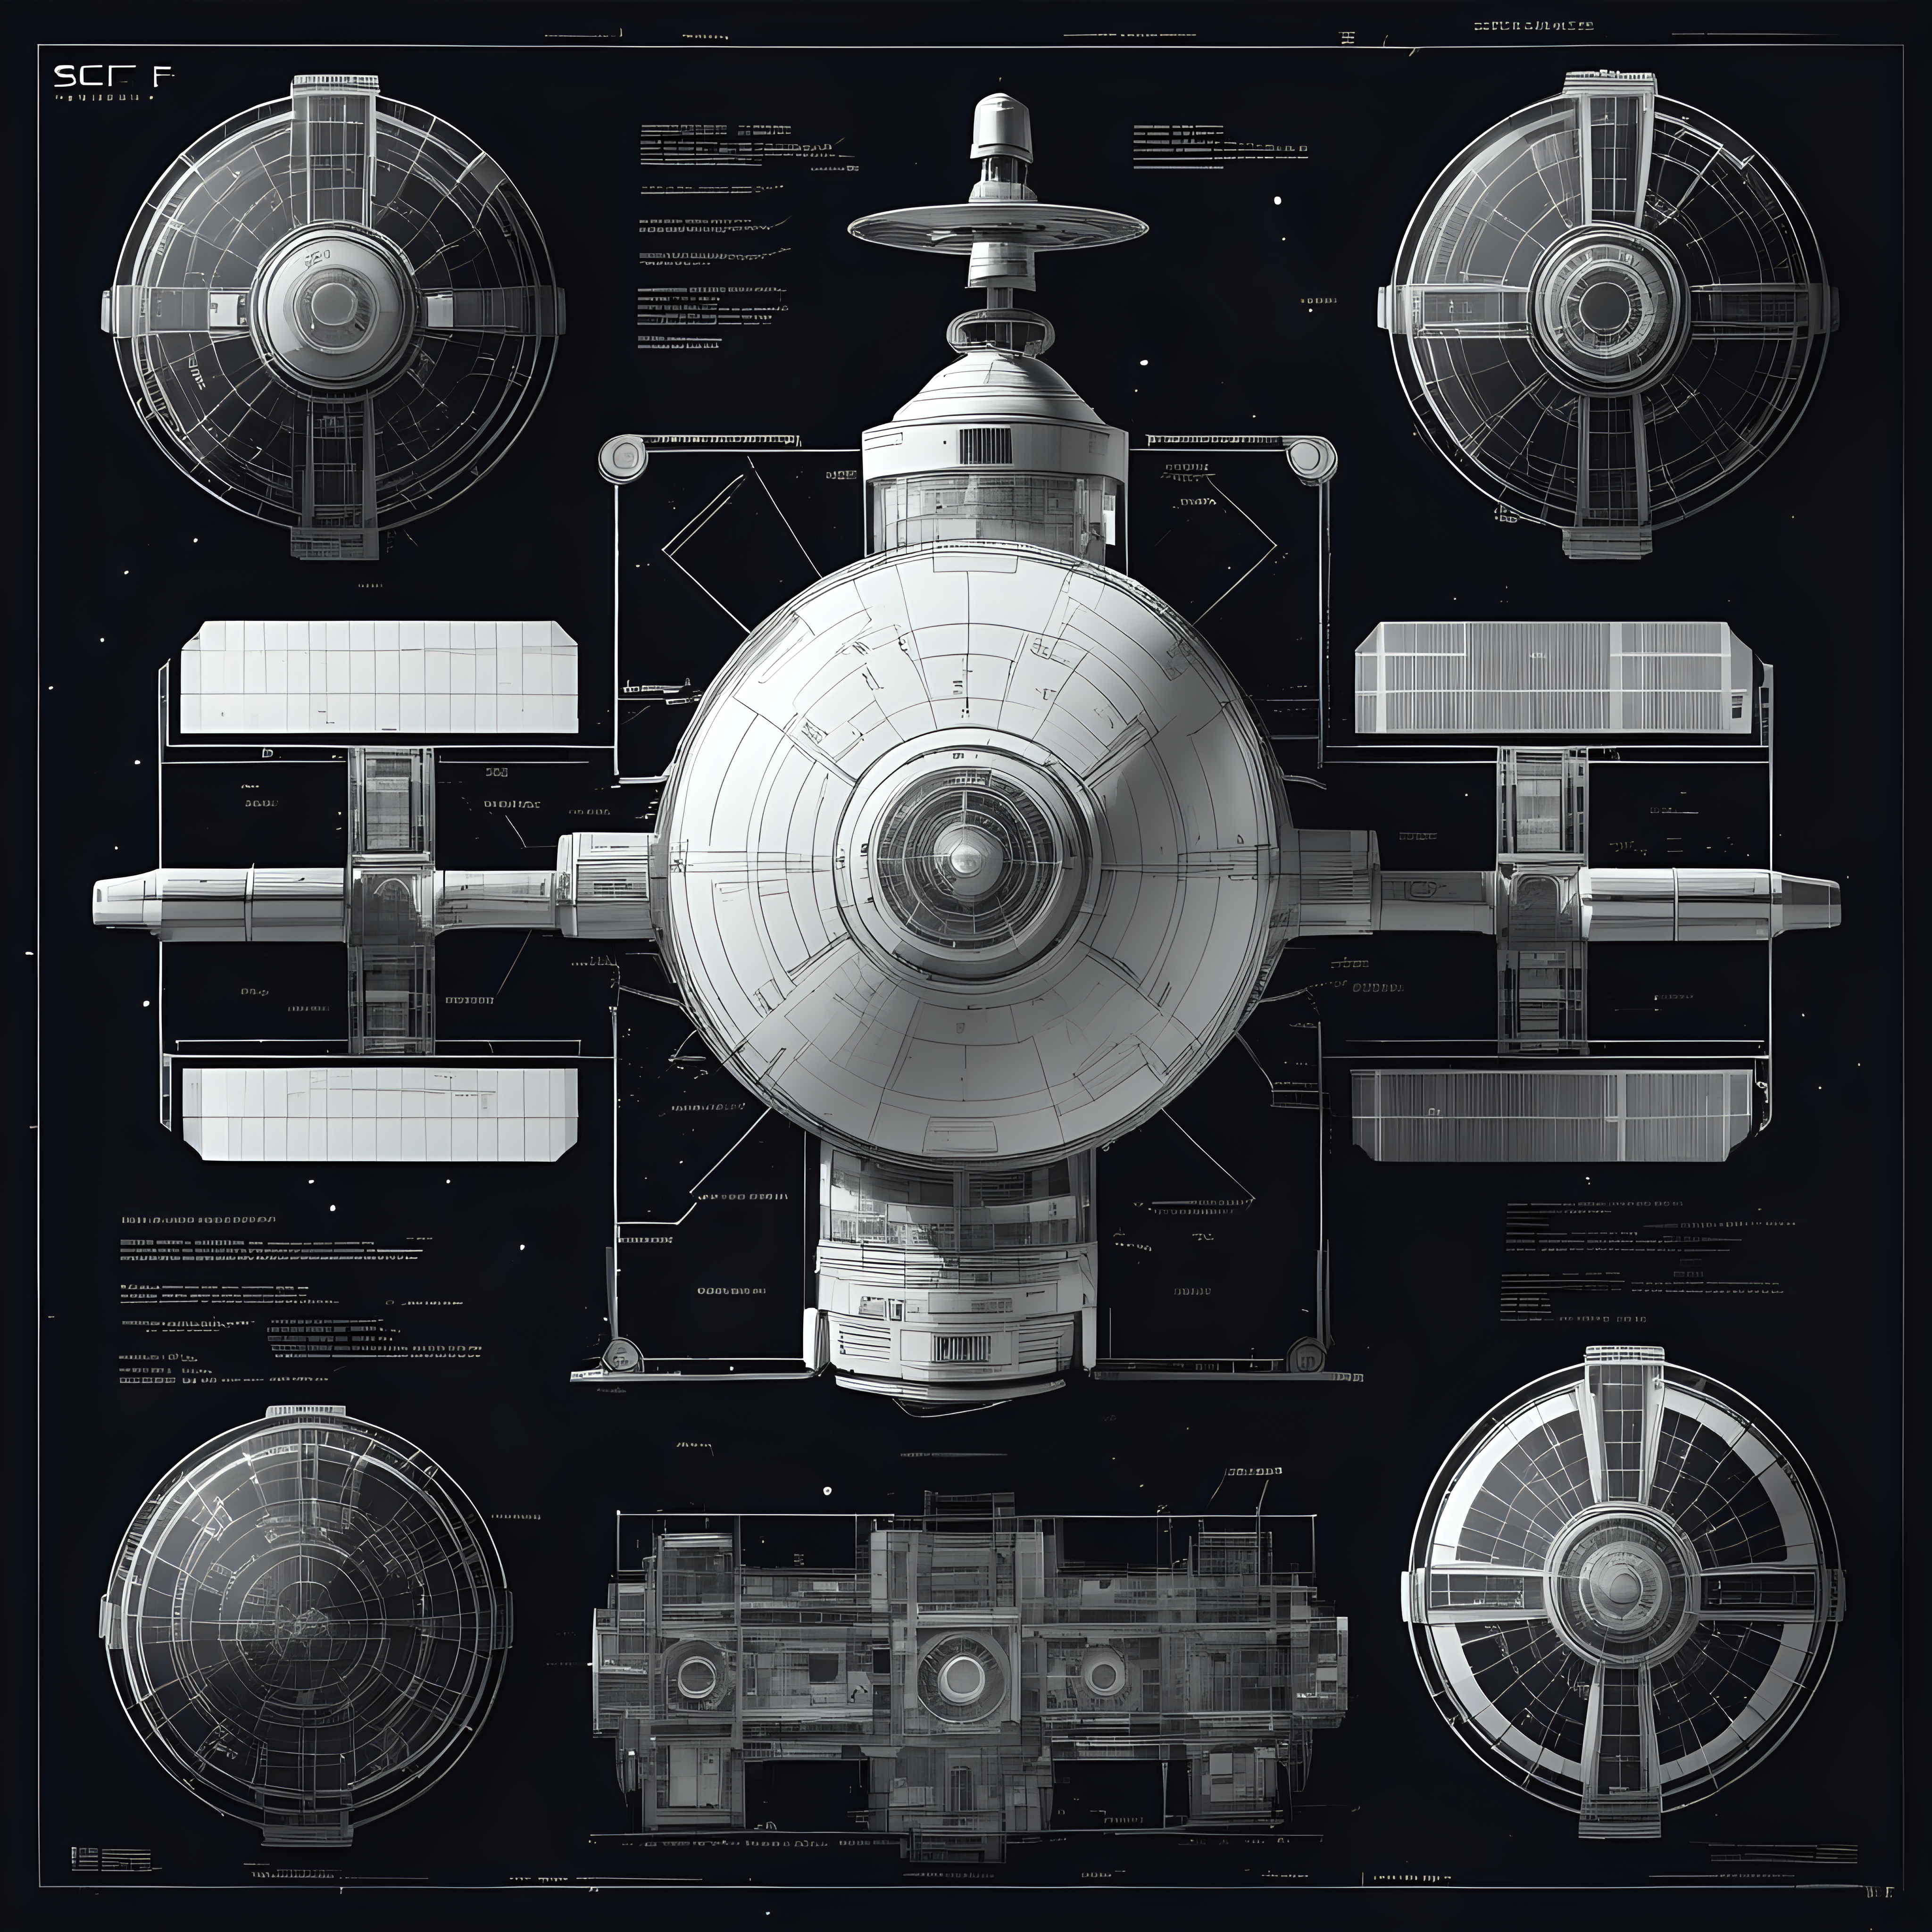 highly detailed black and white blueprints of scifi